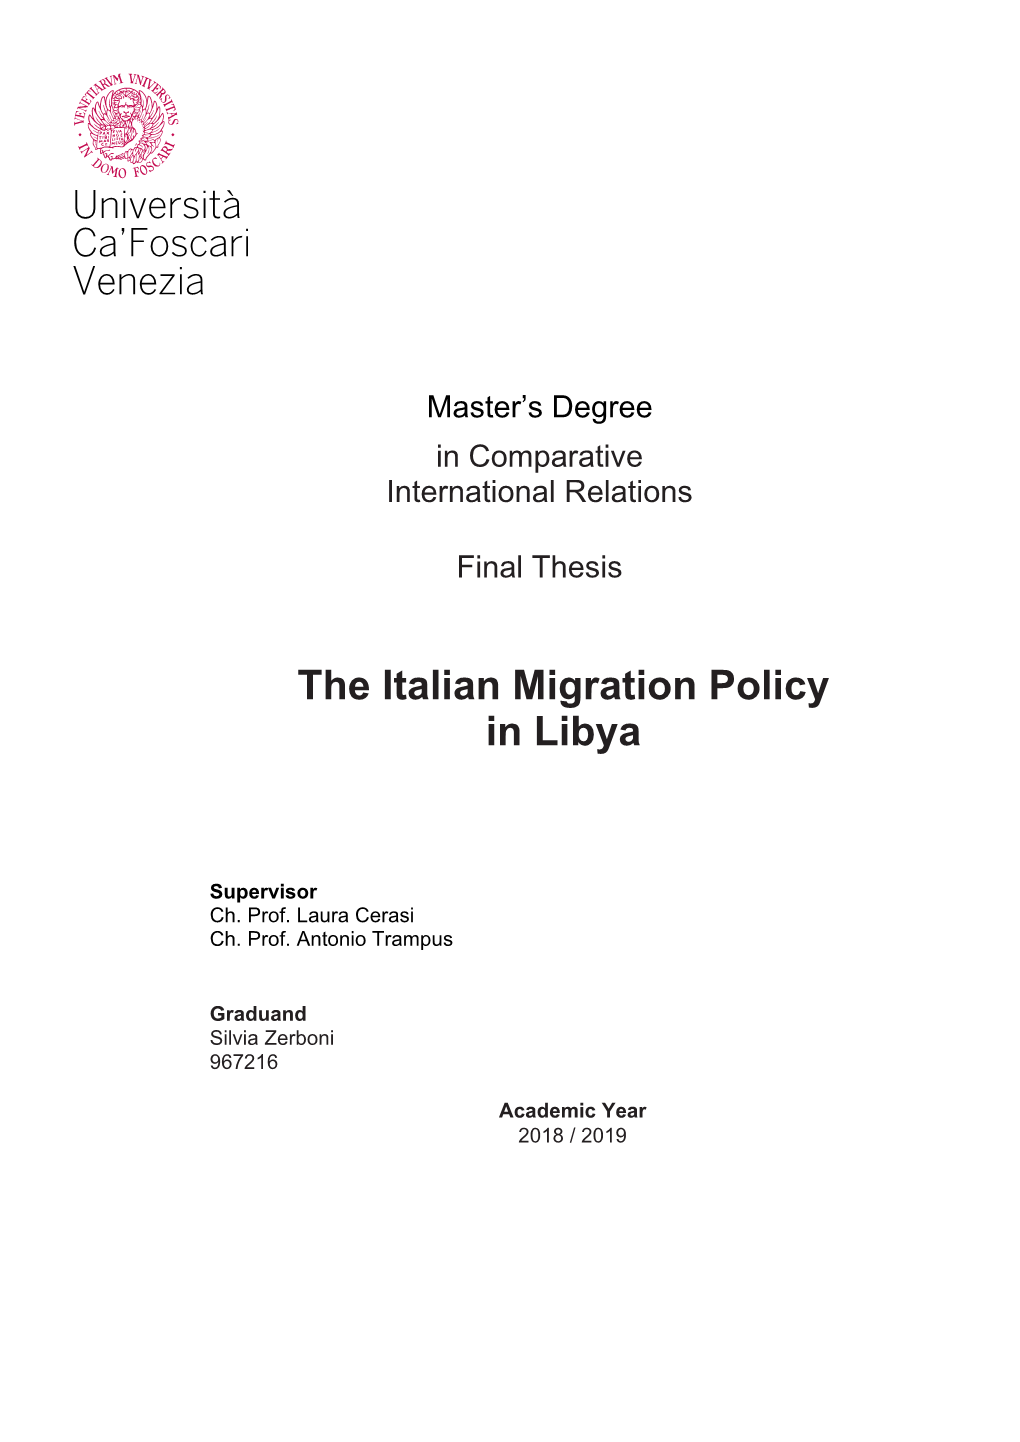 The Italian Migration Policy in Libya